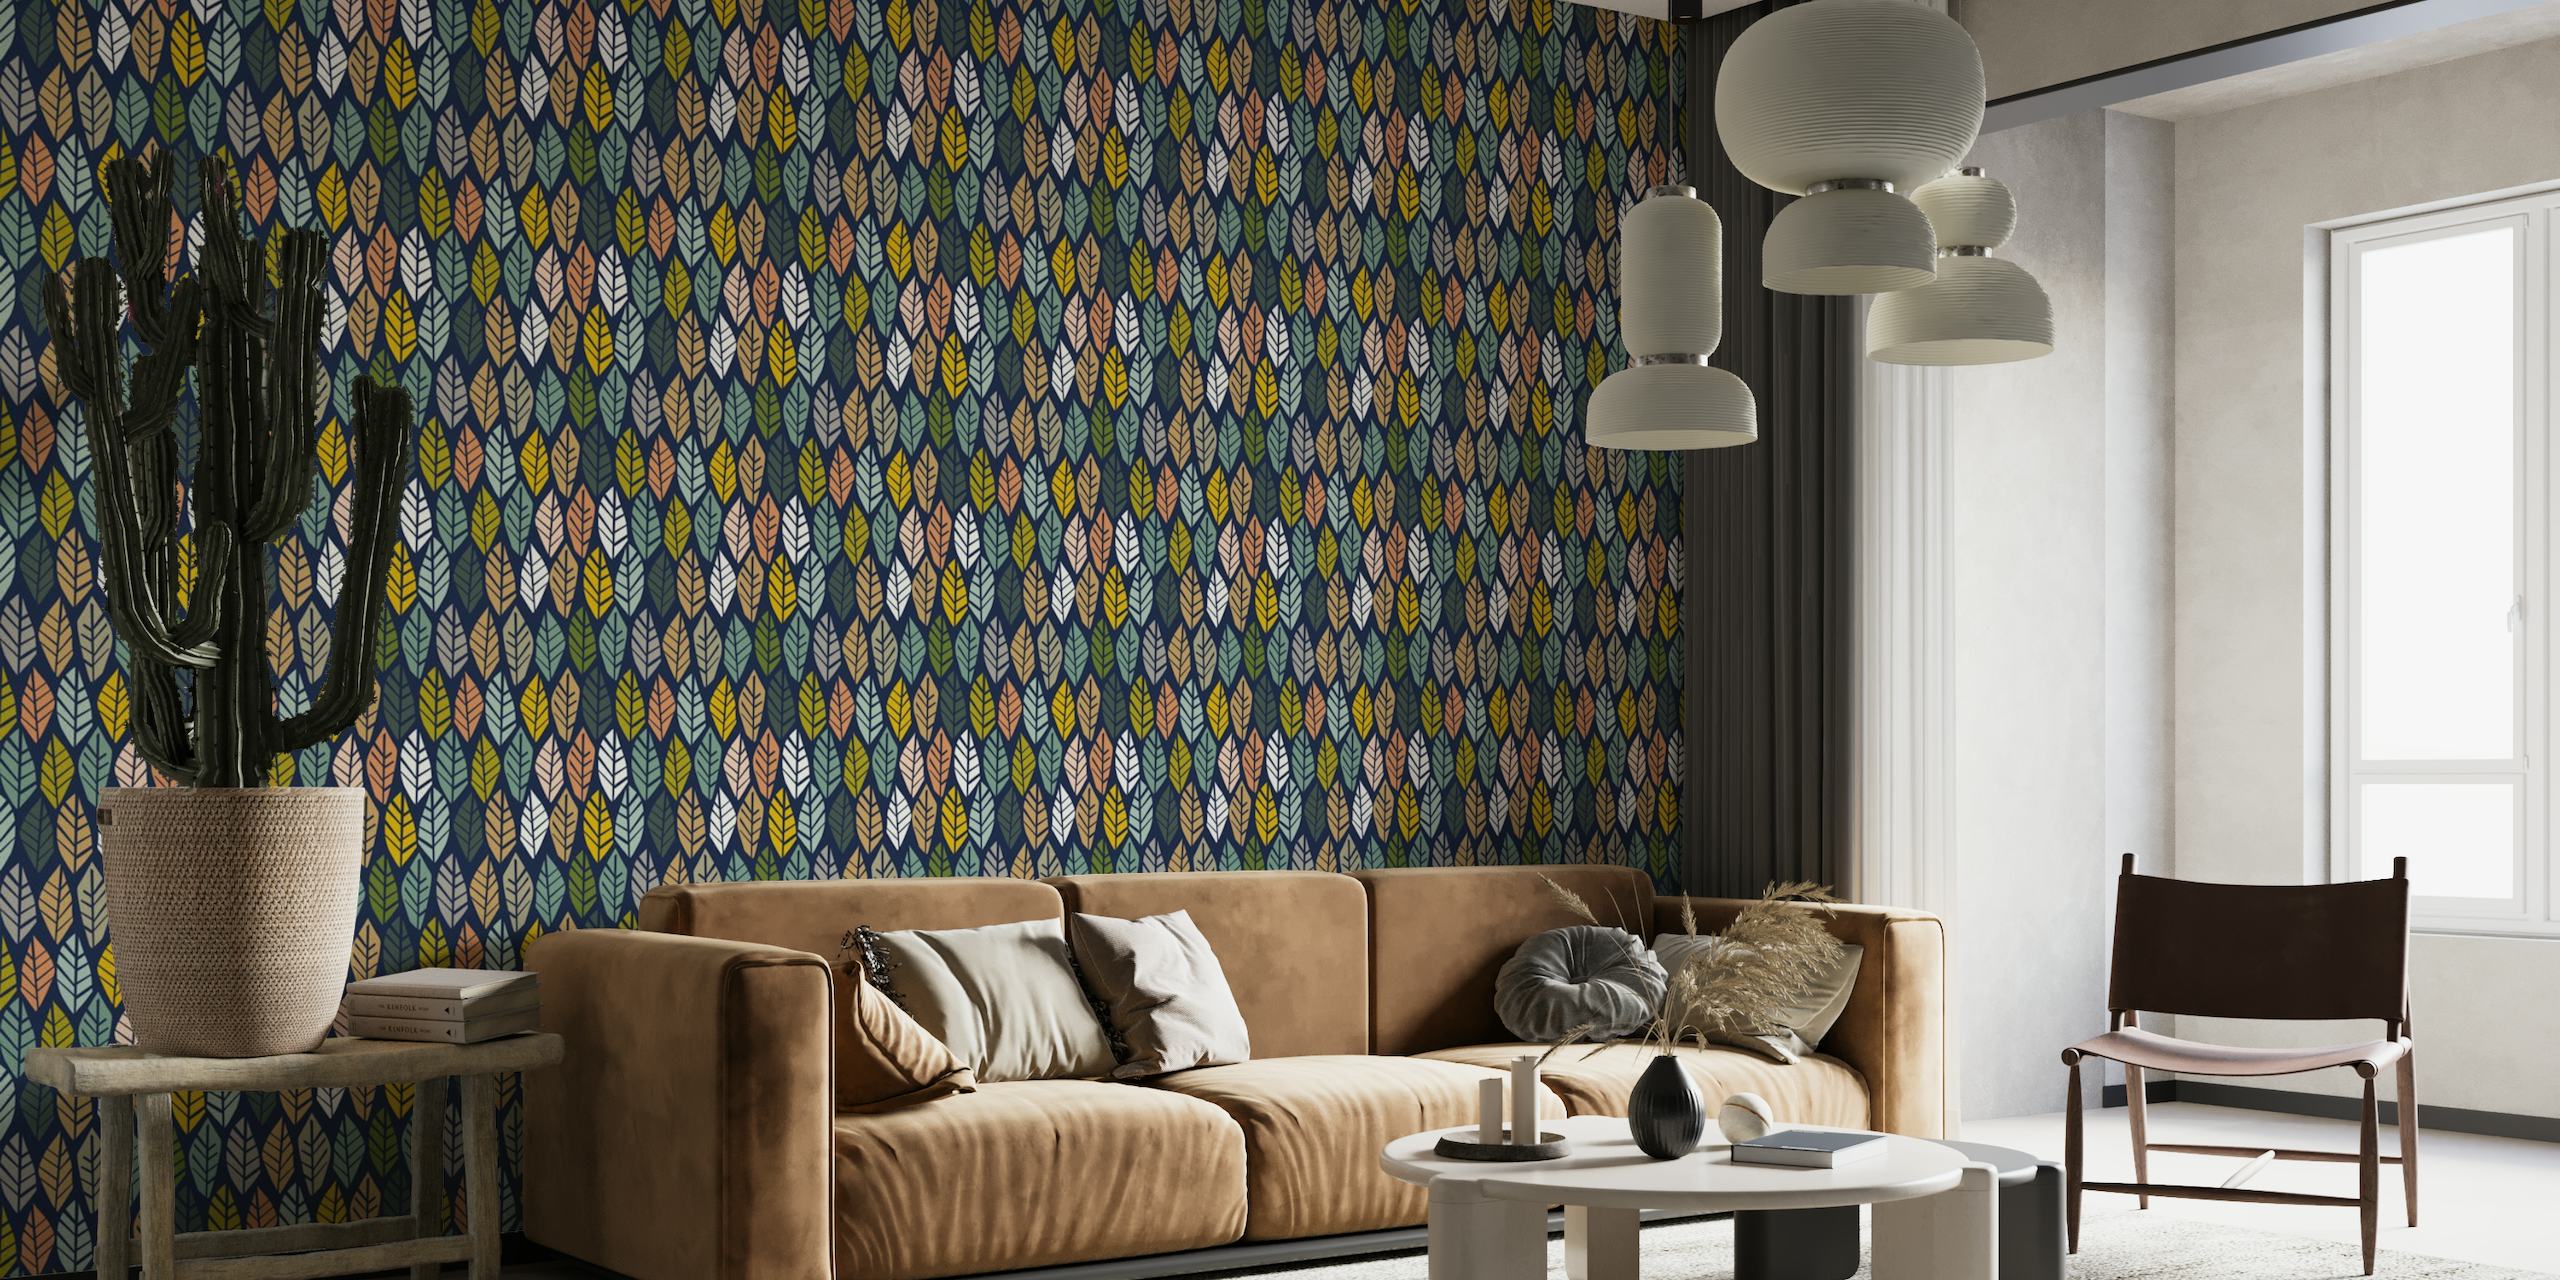 Stylized leaves in cozy Nordic-inspired colors on a dark background for a wall mural